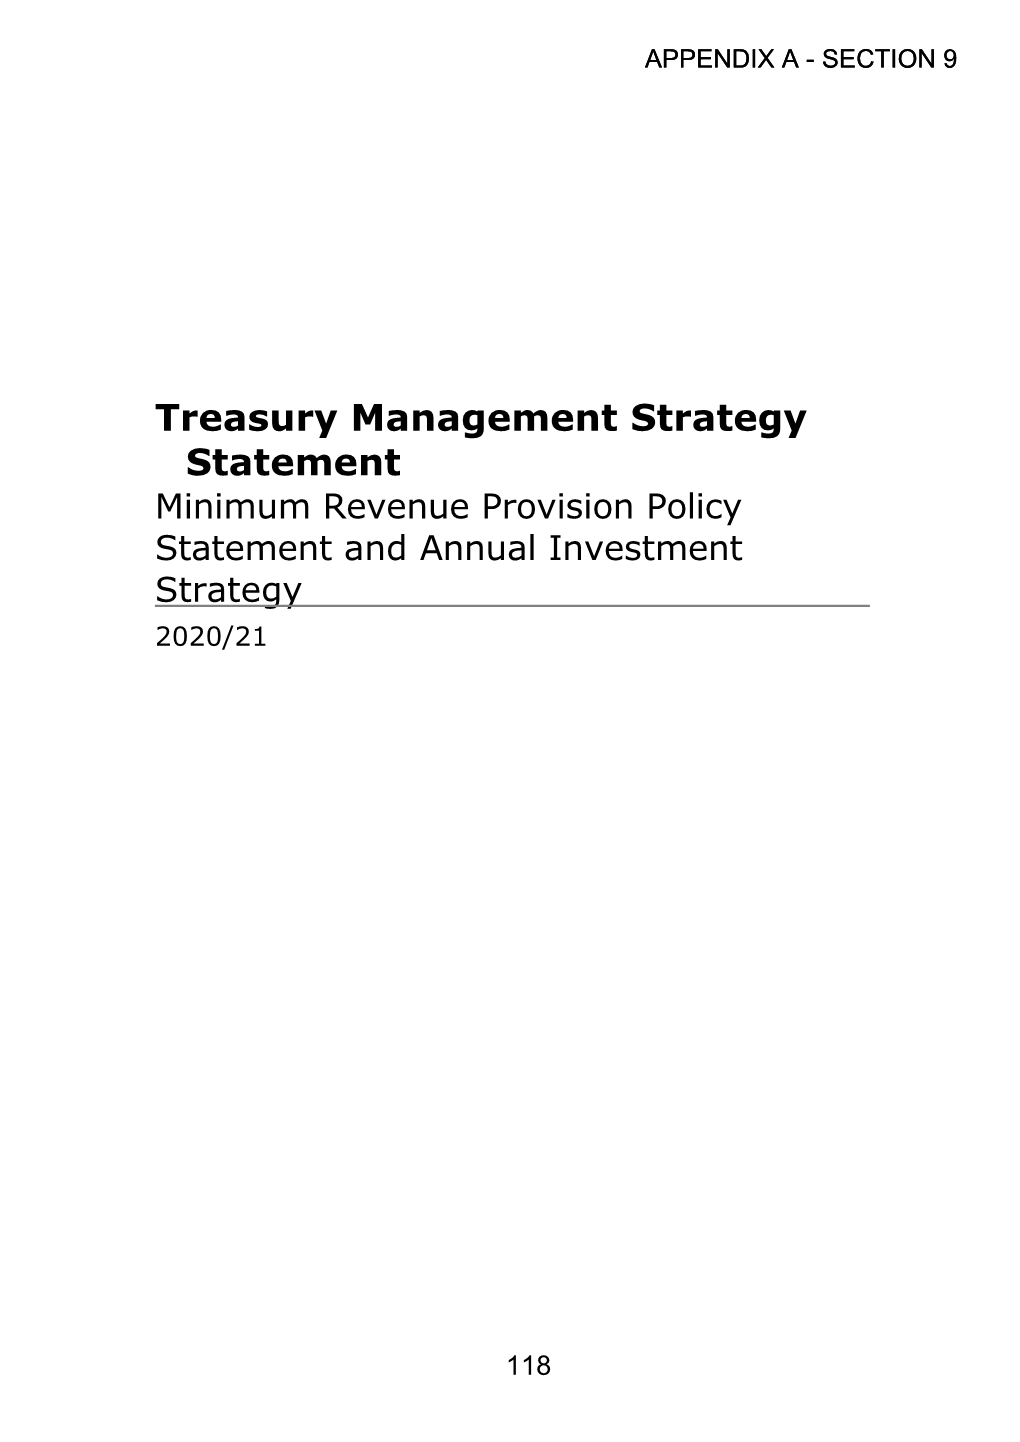 Treasury Management Strategy Statement Minimum Revenue Provision Policy Statement and Annual Investment Strategy 2020/21